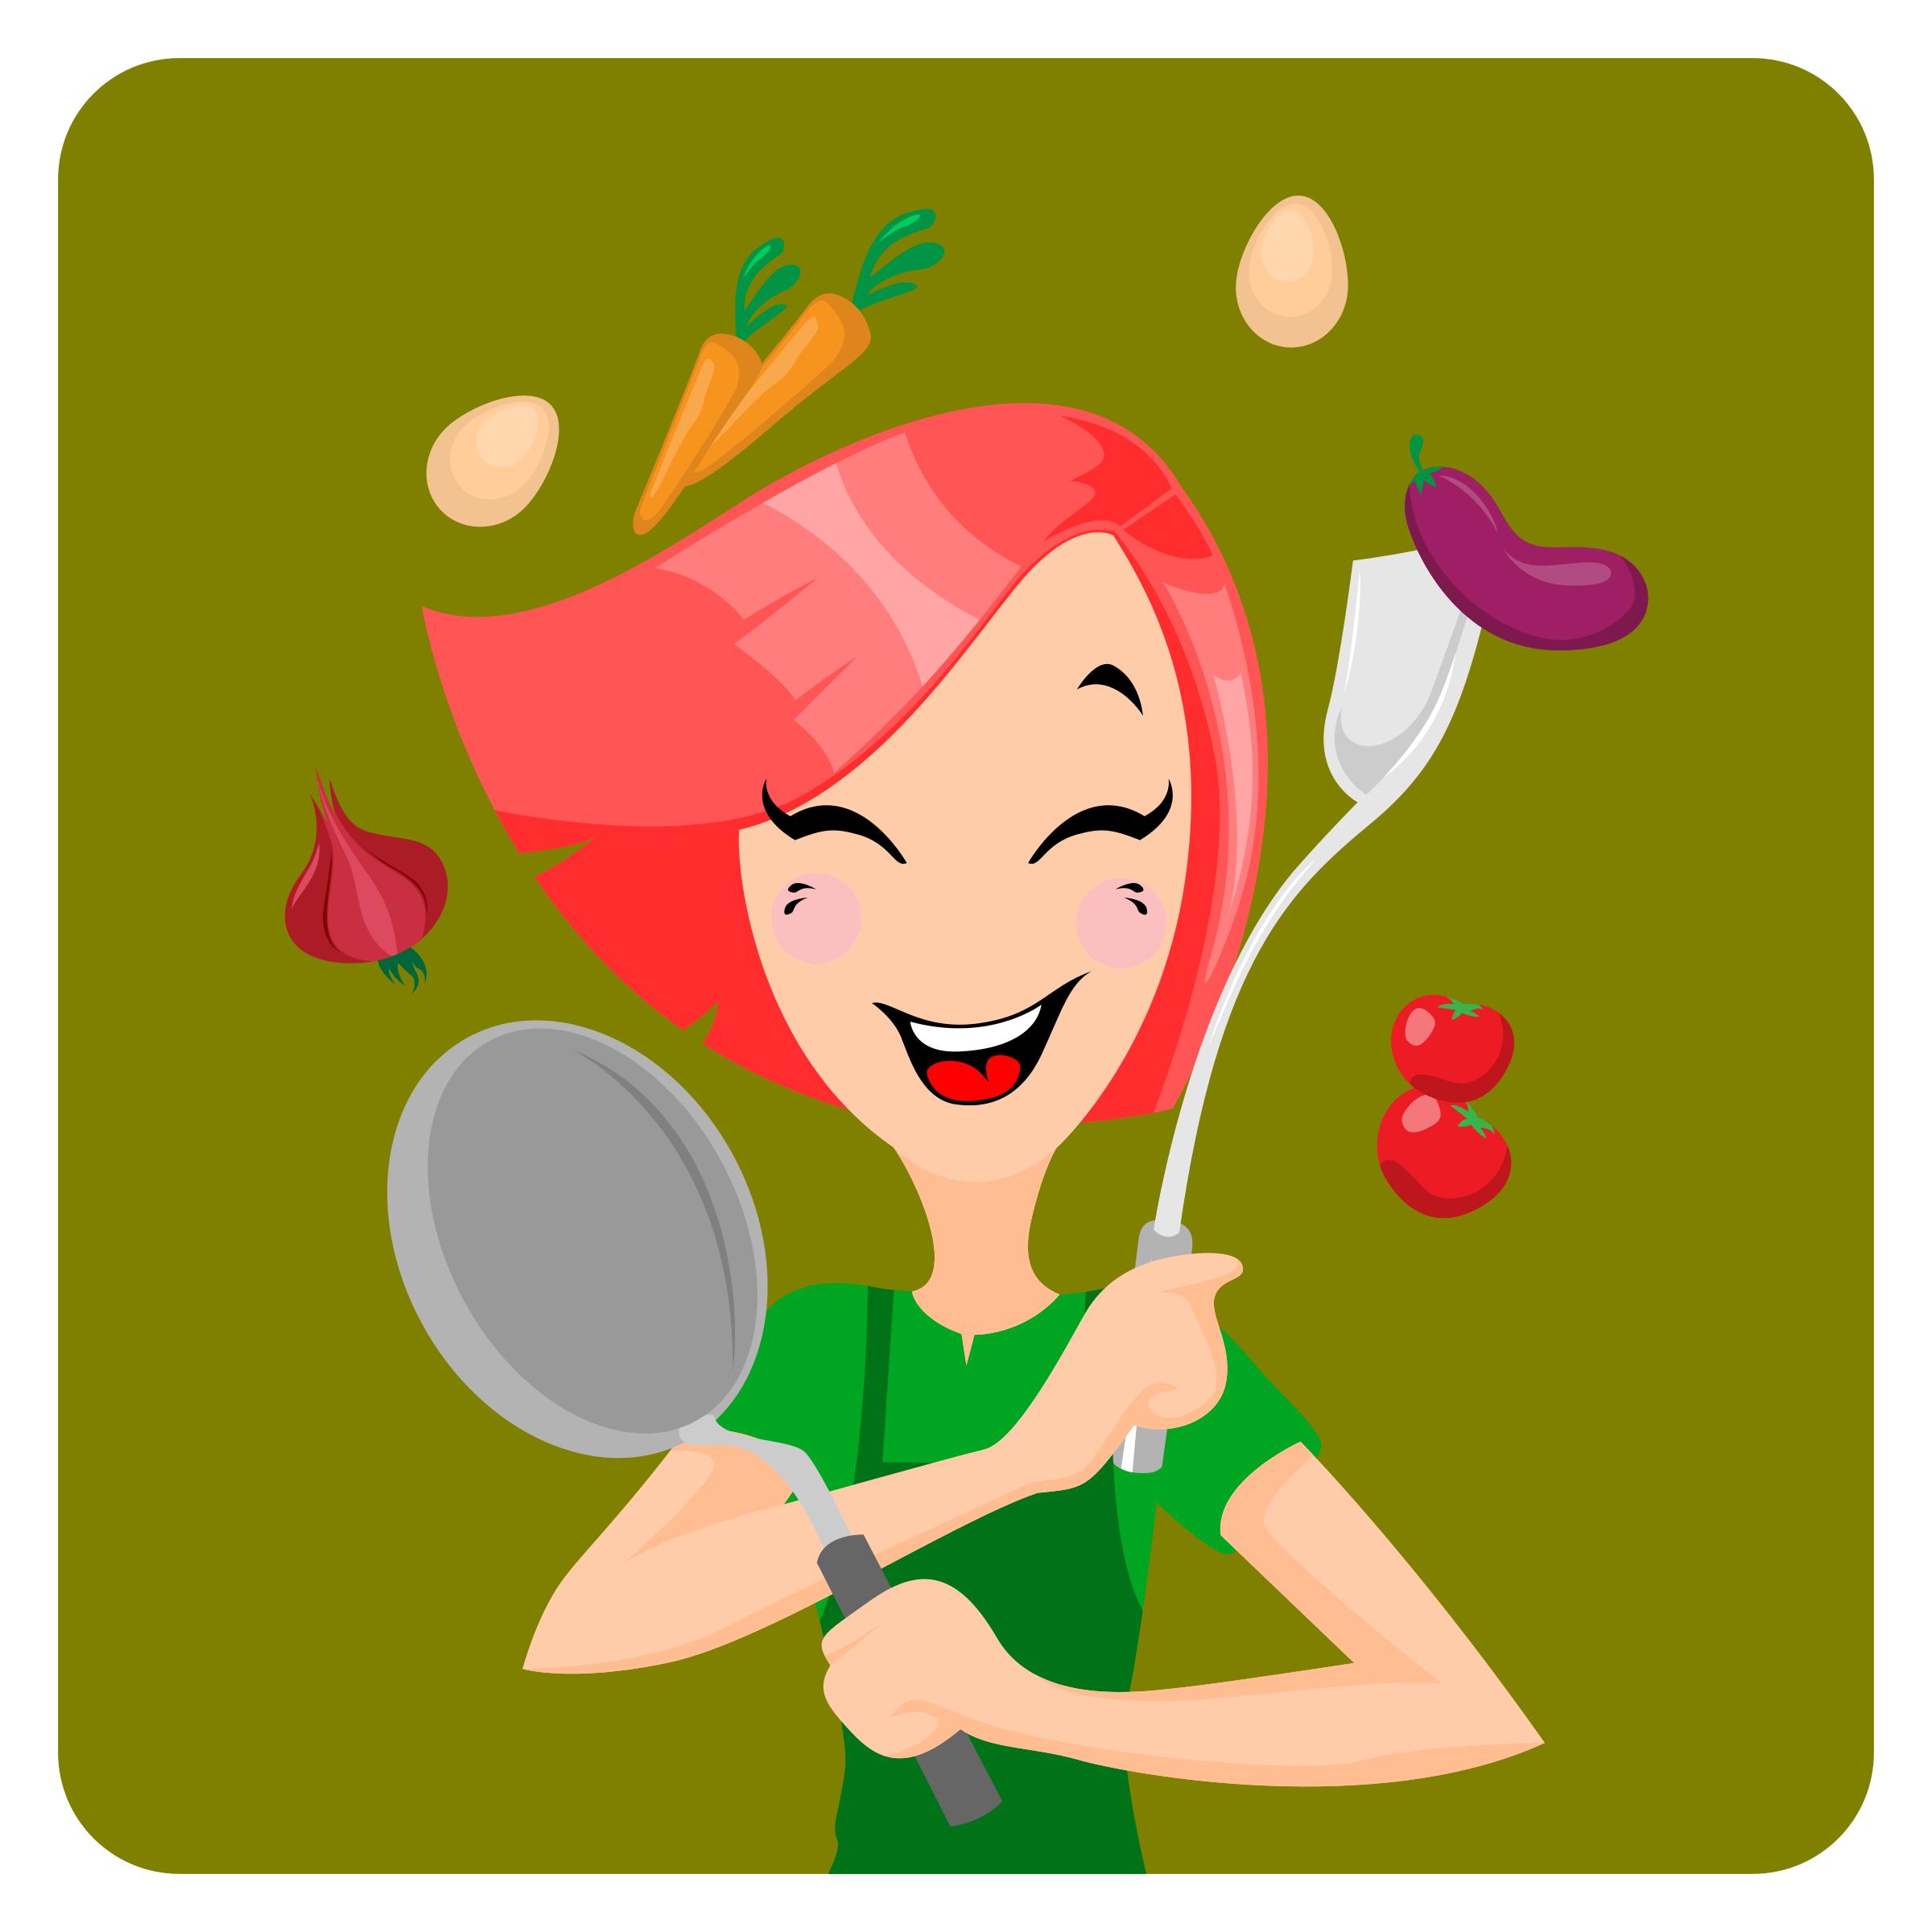 A girl prepares cooking icons